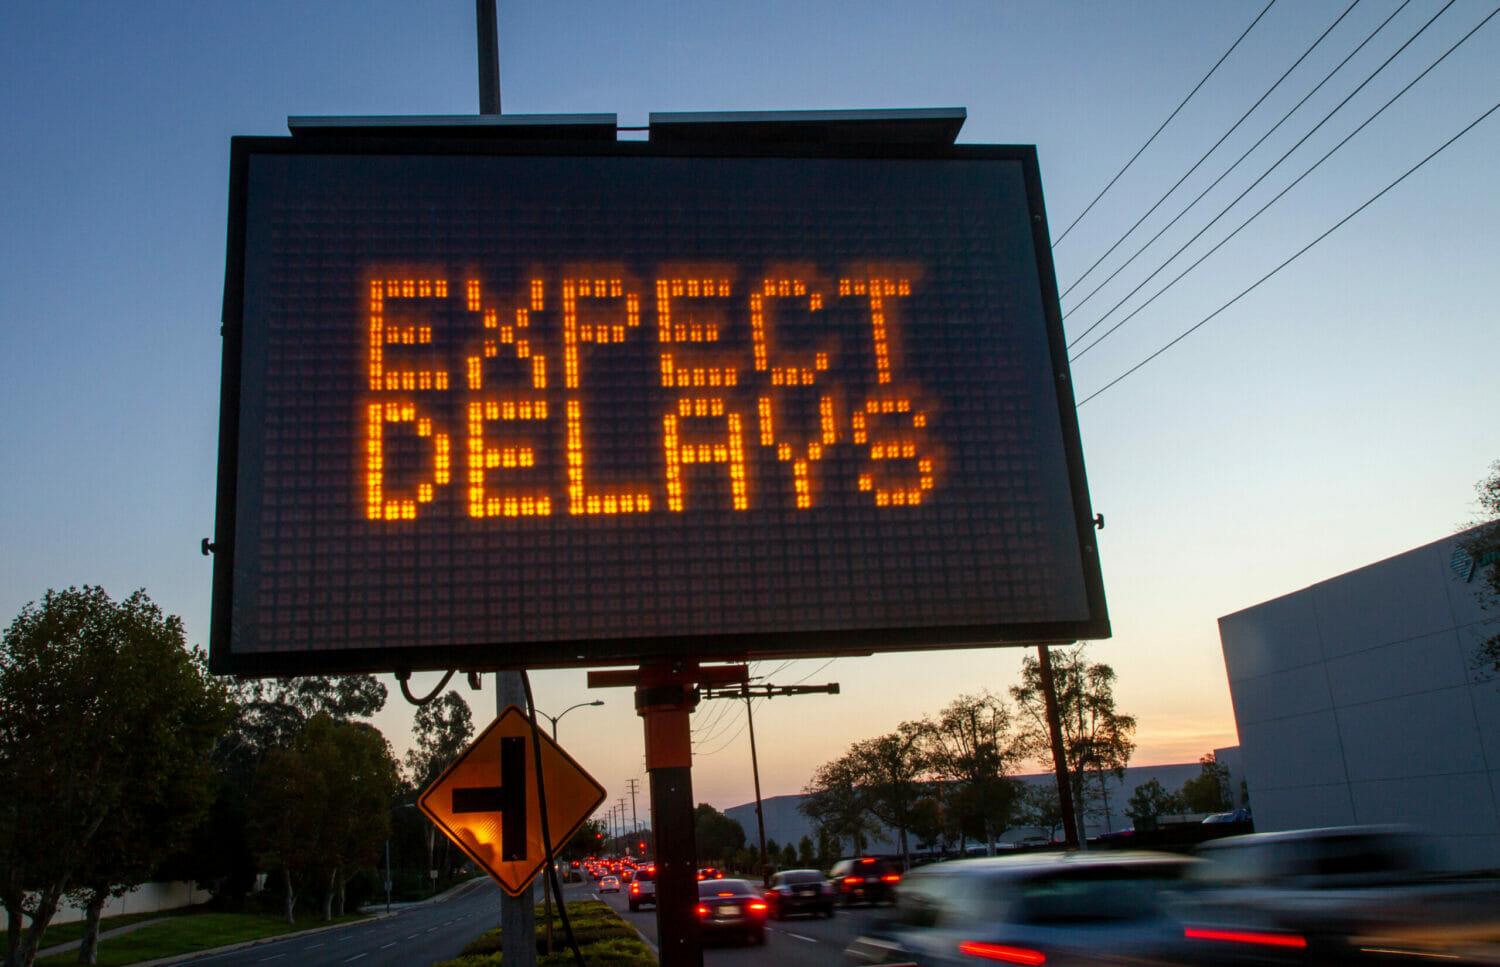 Lighted traffic sign reading "expect delays" in capital organe letters, with a dusk sky in the background and cars driving by in the foreground.